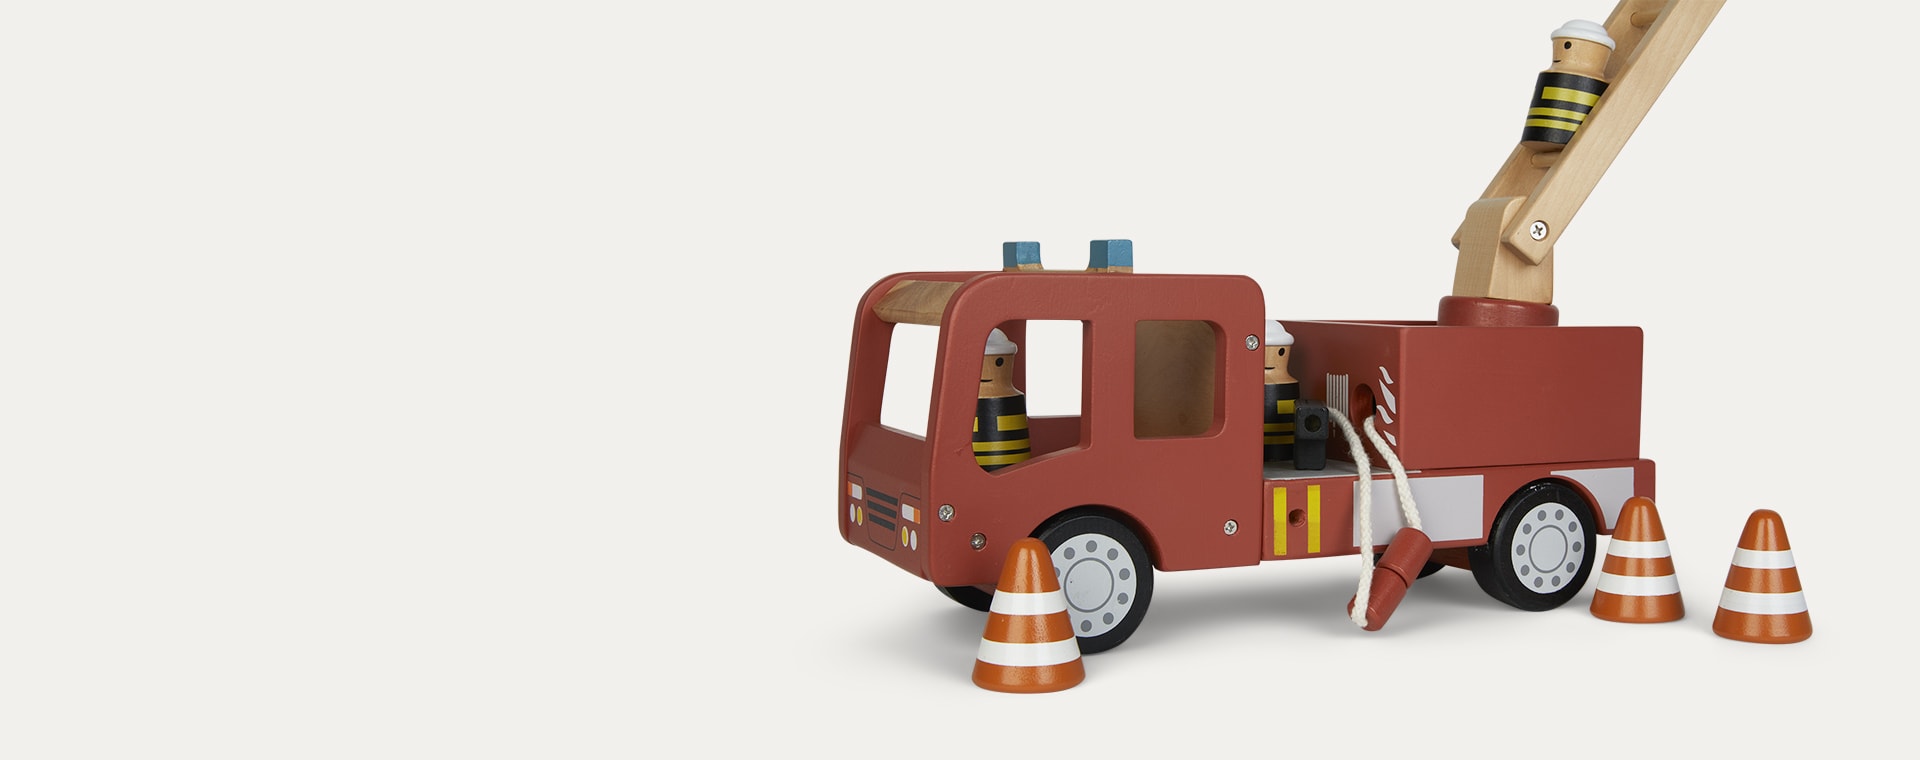 Red Kid's Concept Fire Truck